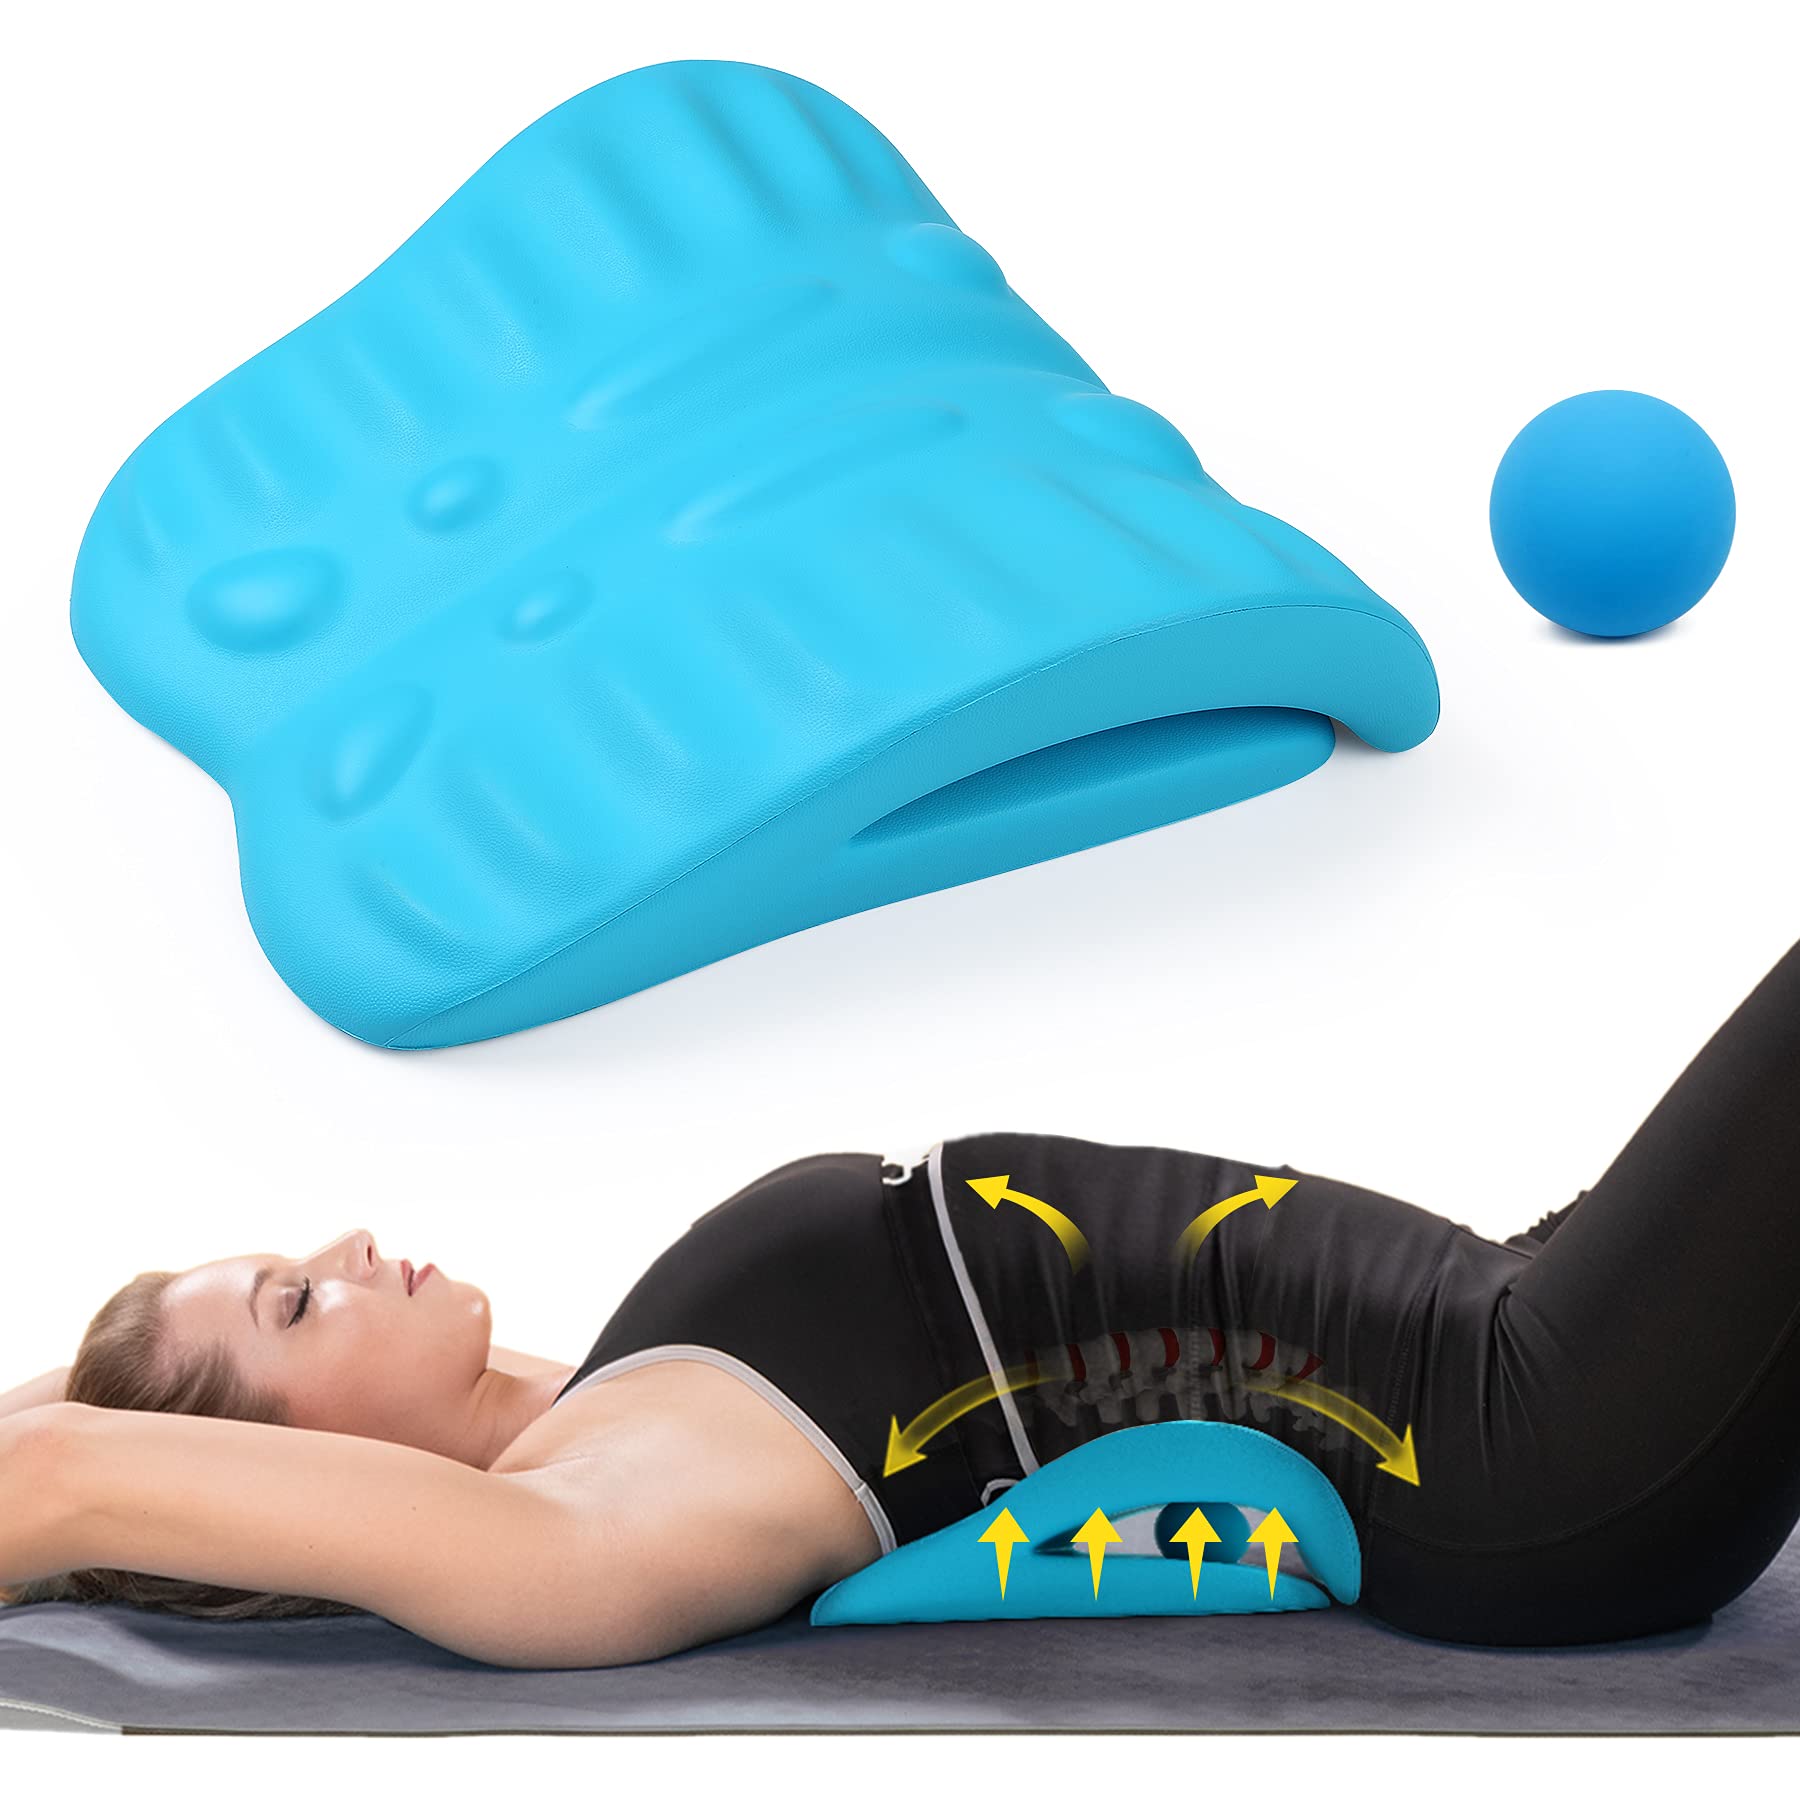 Lumbar Support Pillow For Low Back Pain Relief And Sciatic Nerve